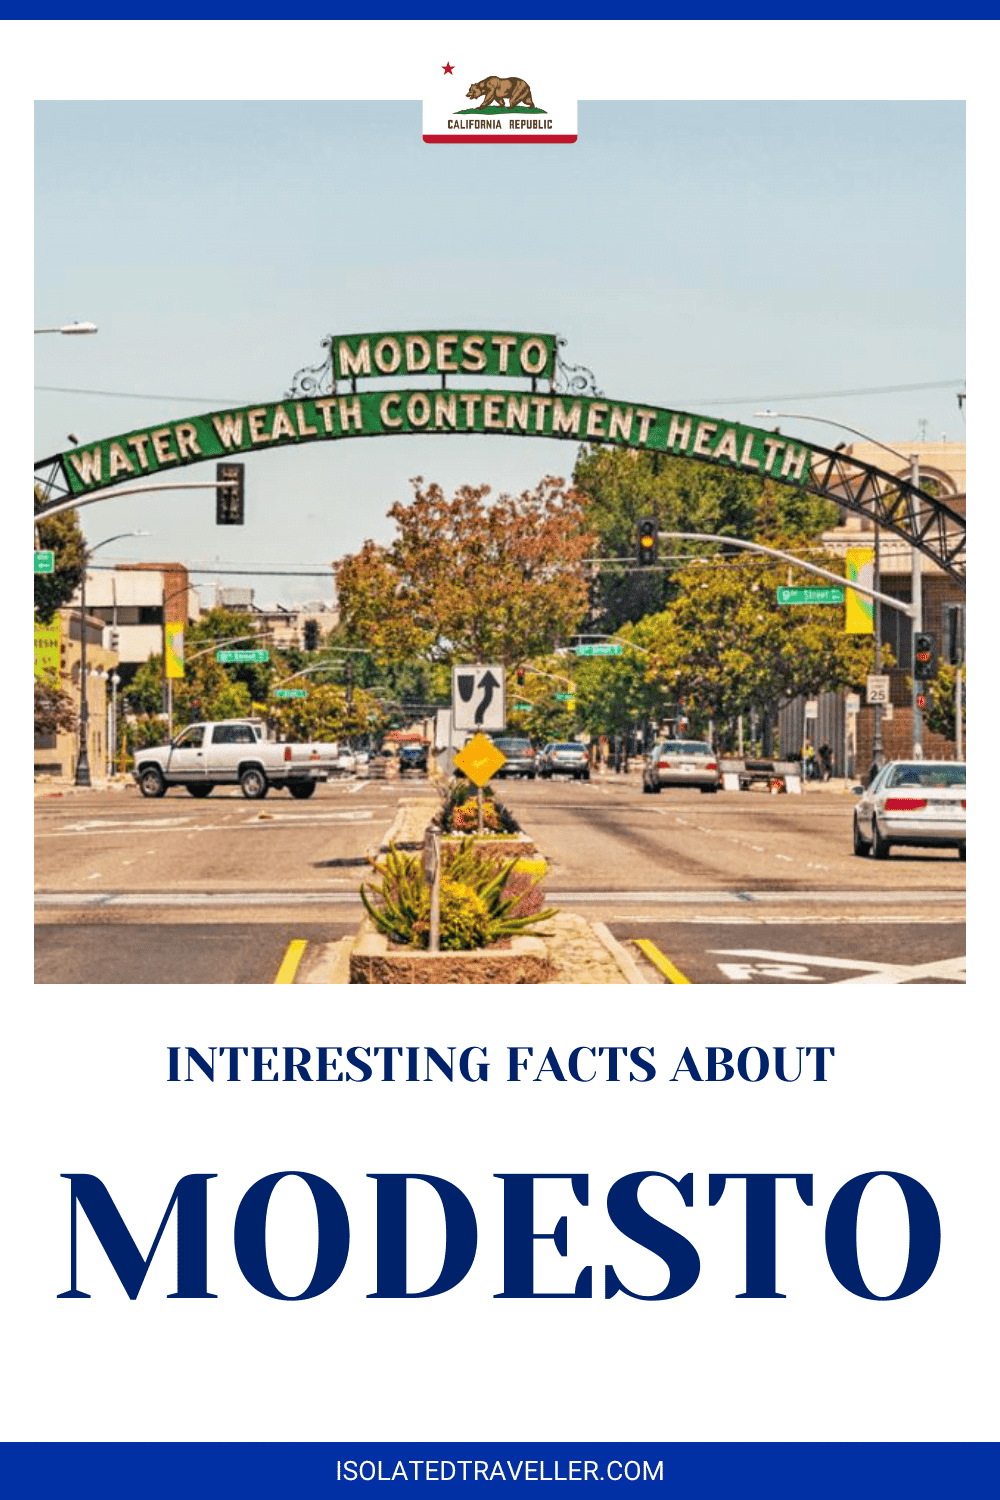 Facts About Modesto